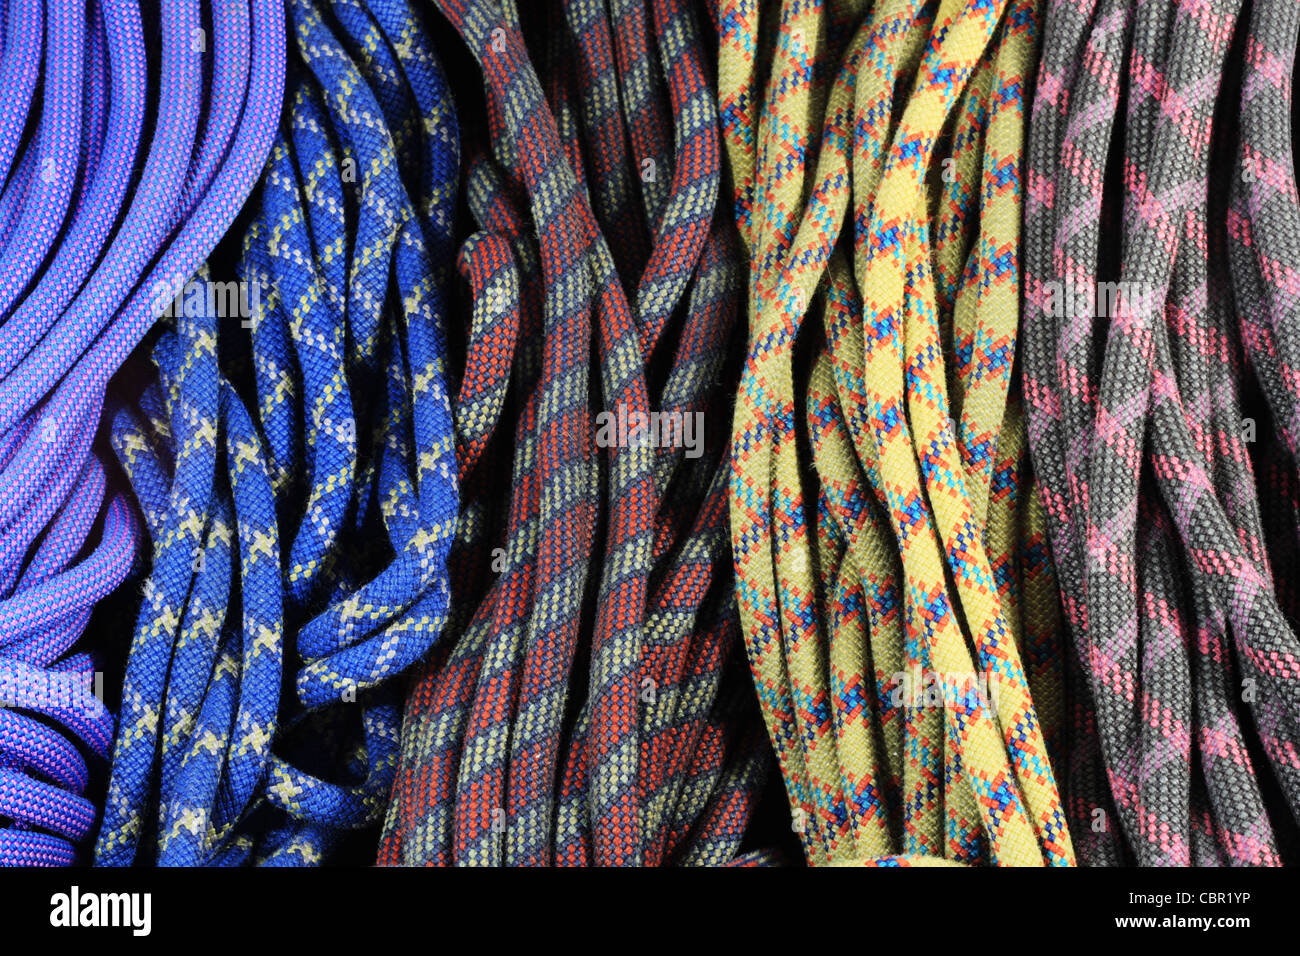 multi-colored old used rock climbing ropes in bundles Stock Photo